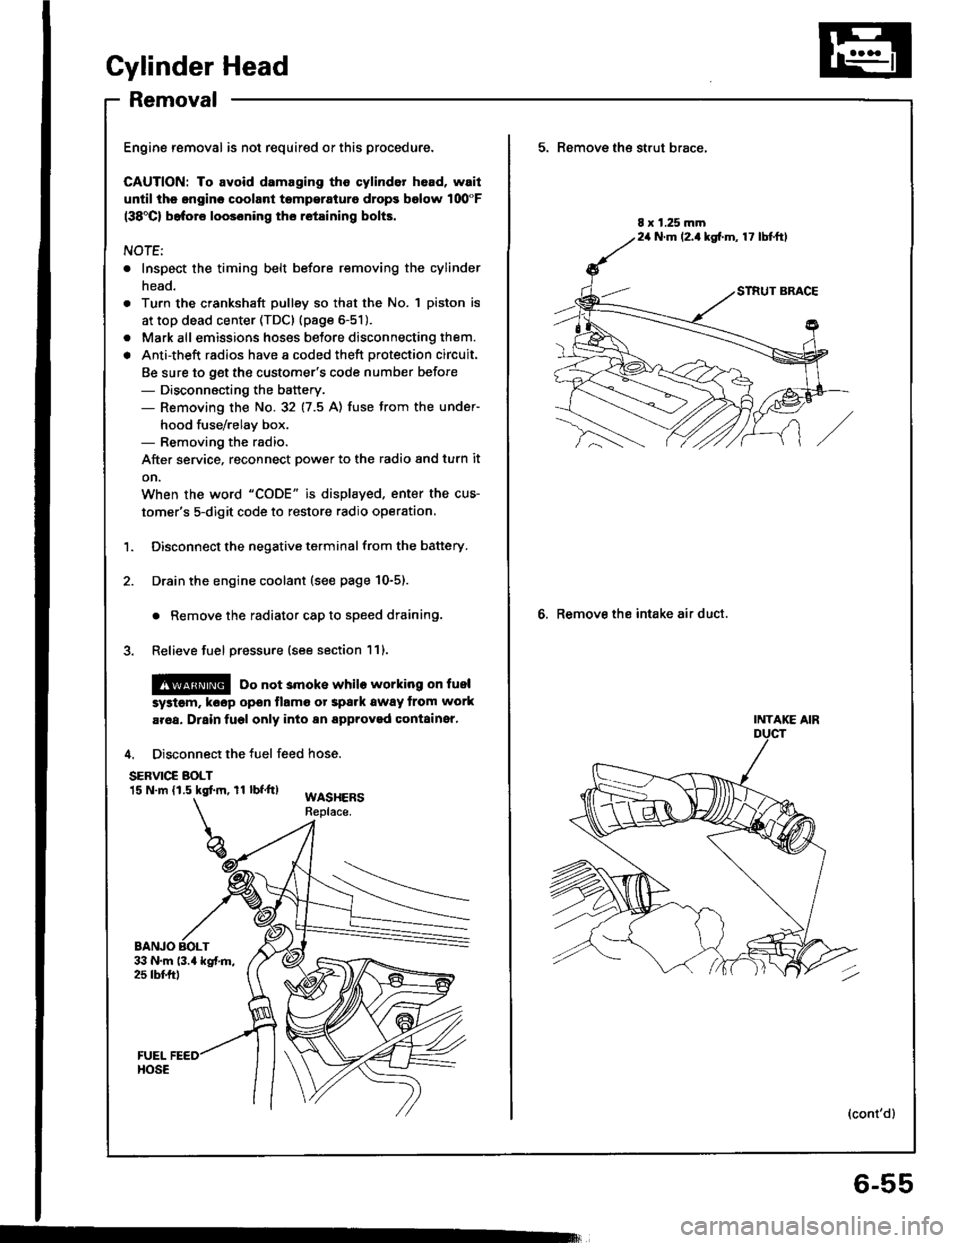 ACURA INTEGRA 1994  Service Repair Manual Cylinder Head
Removal
Engine removal is not required or this procedure.
CAUTION: To avoid damaging tho cylinder head, wail
u[tilths.nginc coolant tsmperaturo drops bolow 100"F(38Cl bafore loos6ning t